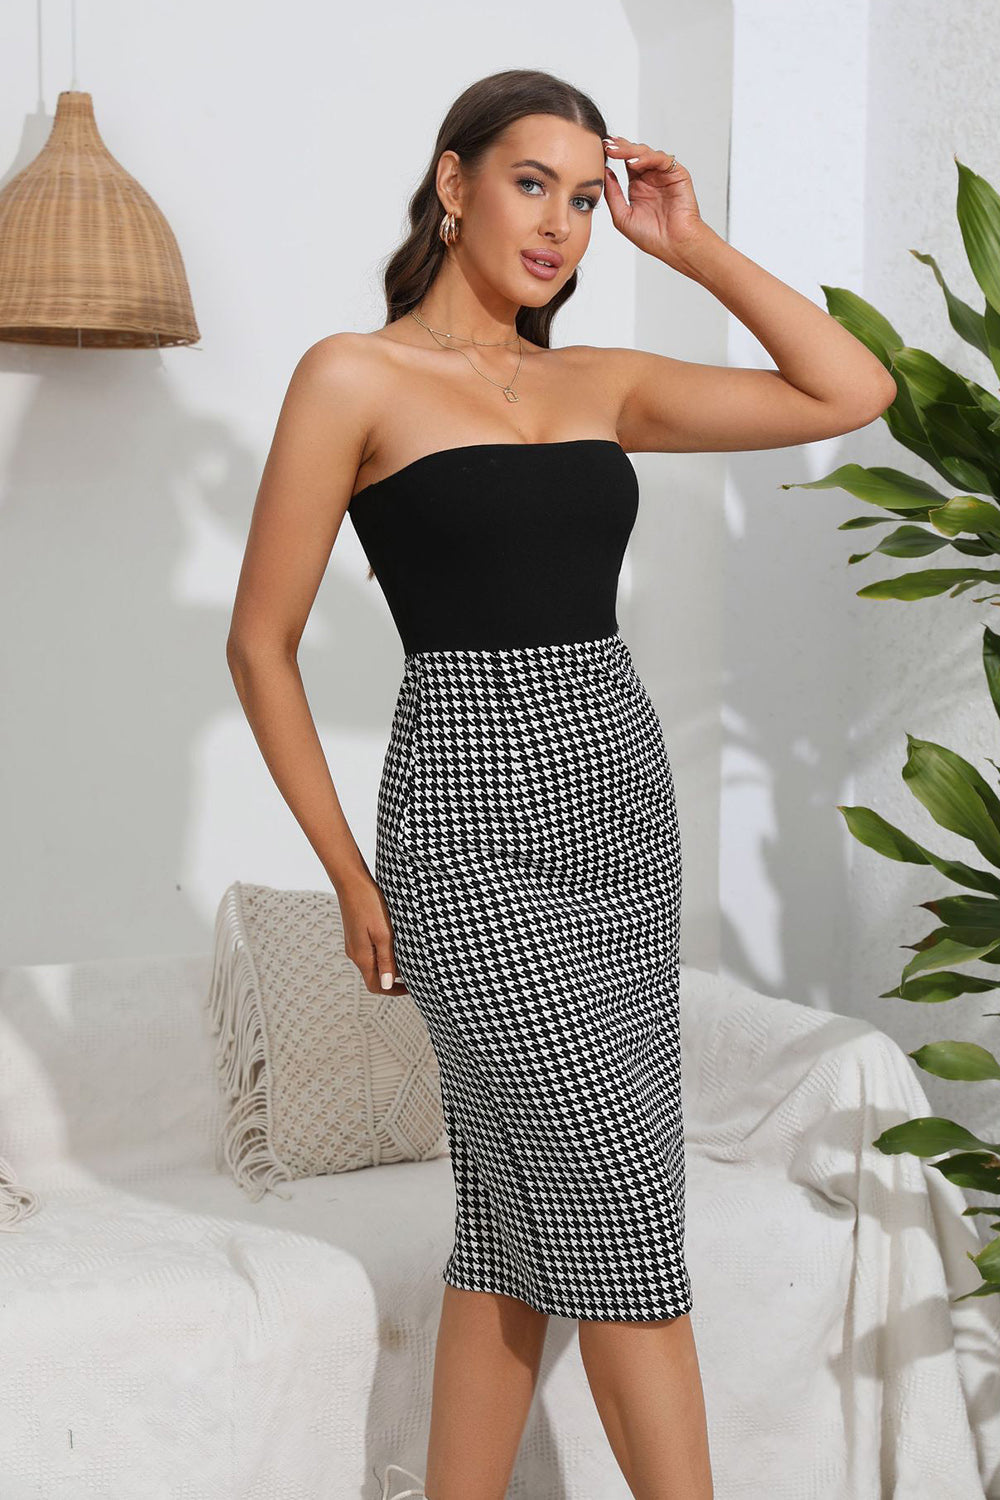 Strapless Plaid Bodycon Cocktail Dress with Slit